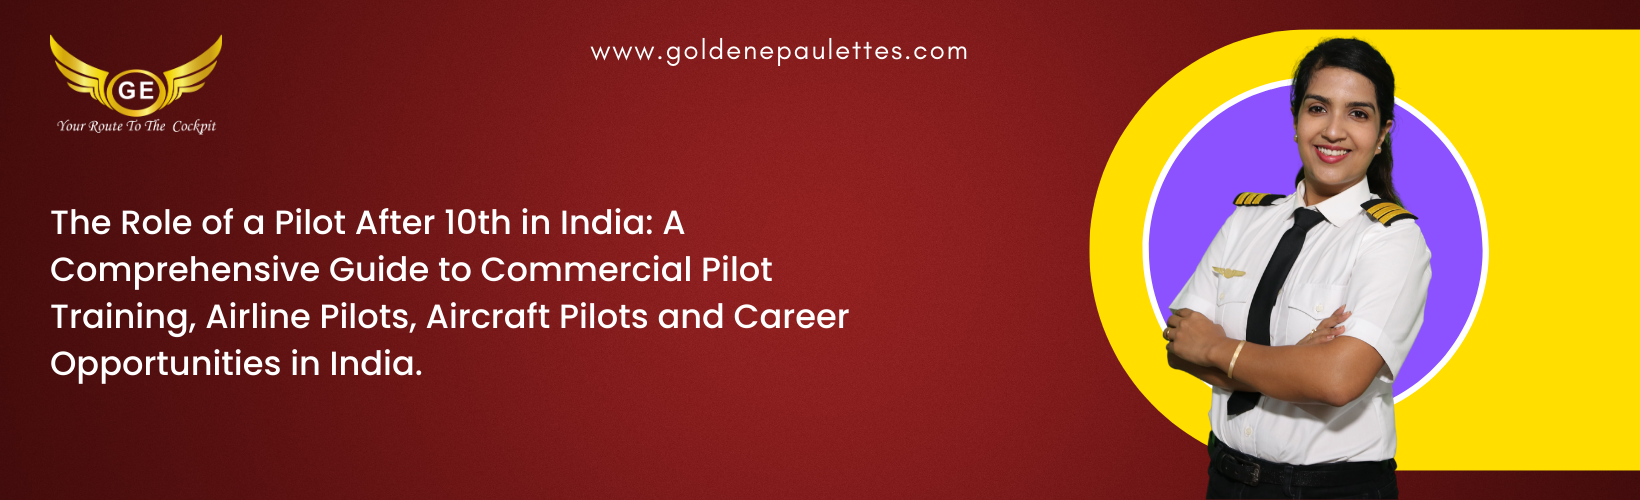 What is the Role of a Pilot After 10th in India